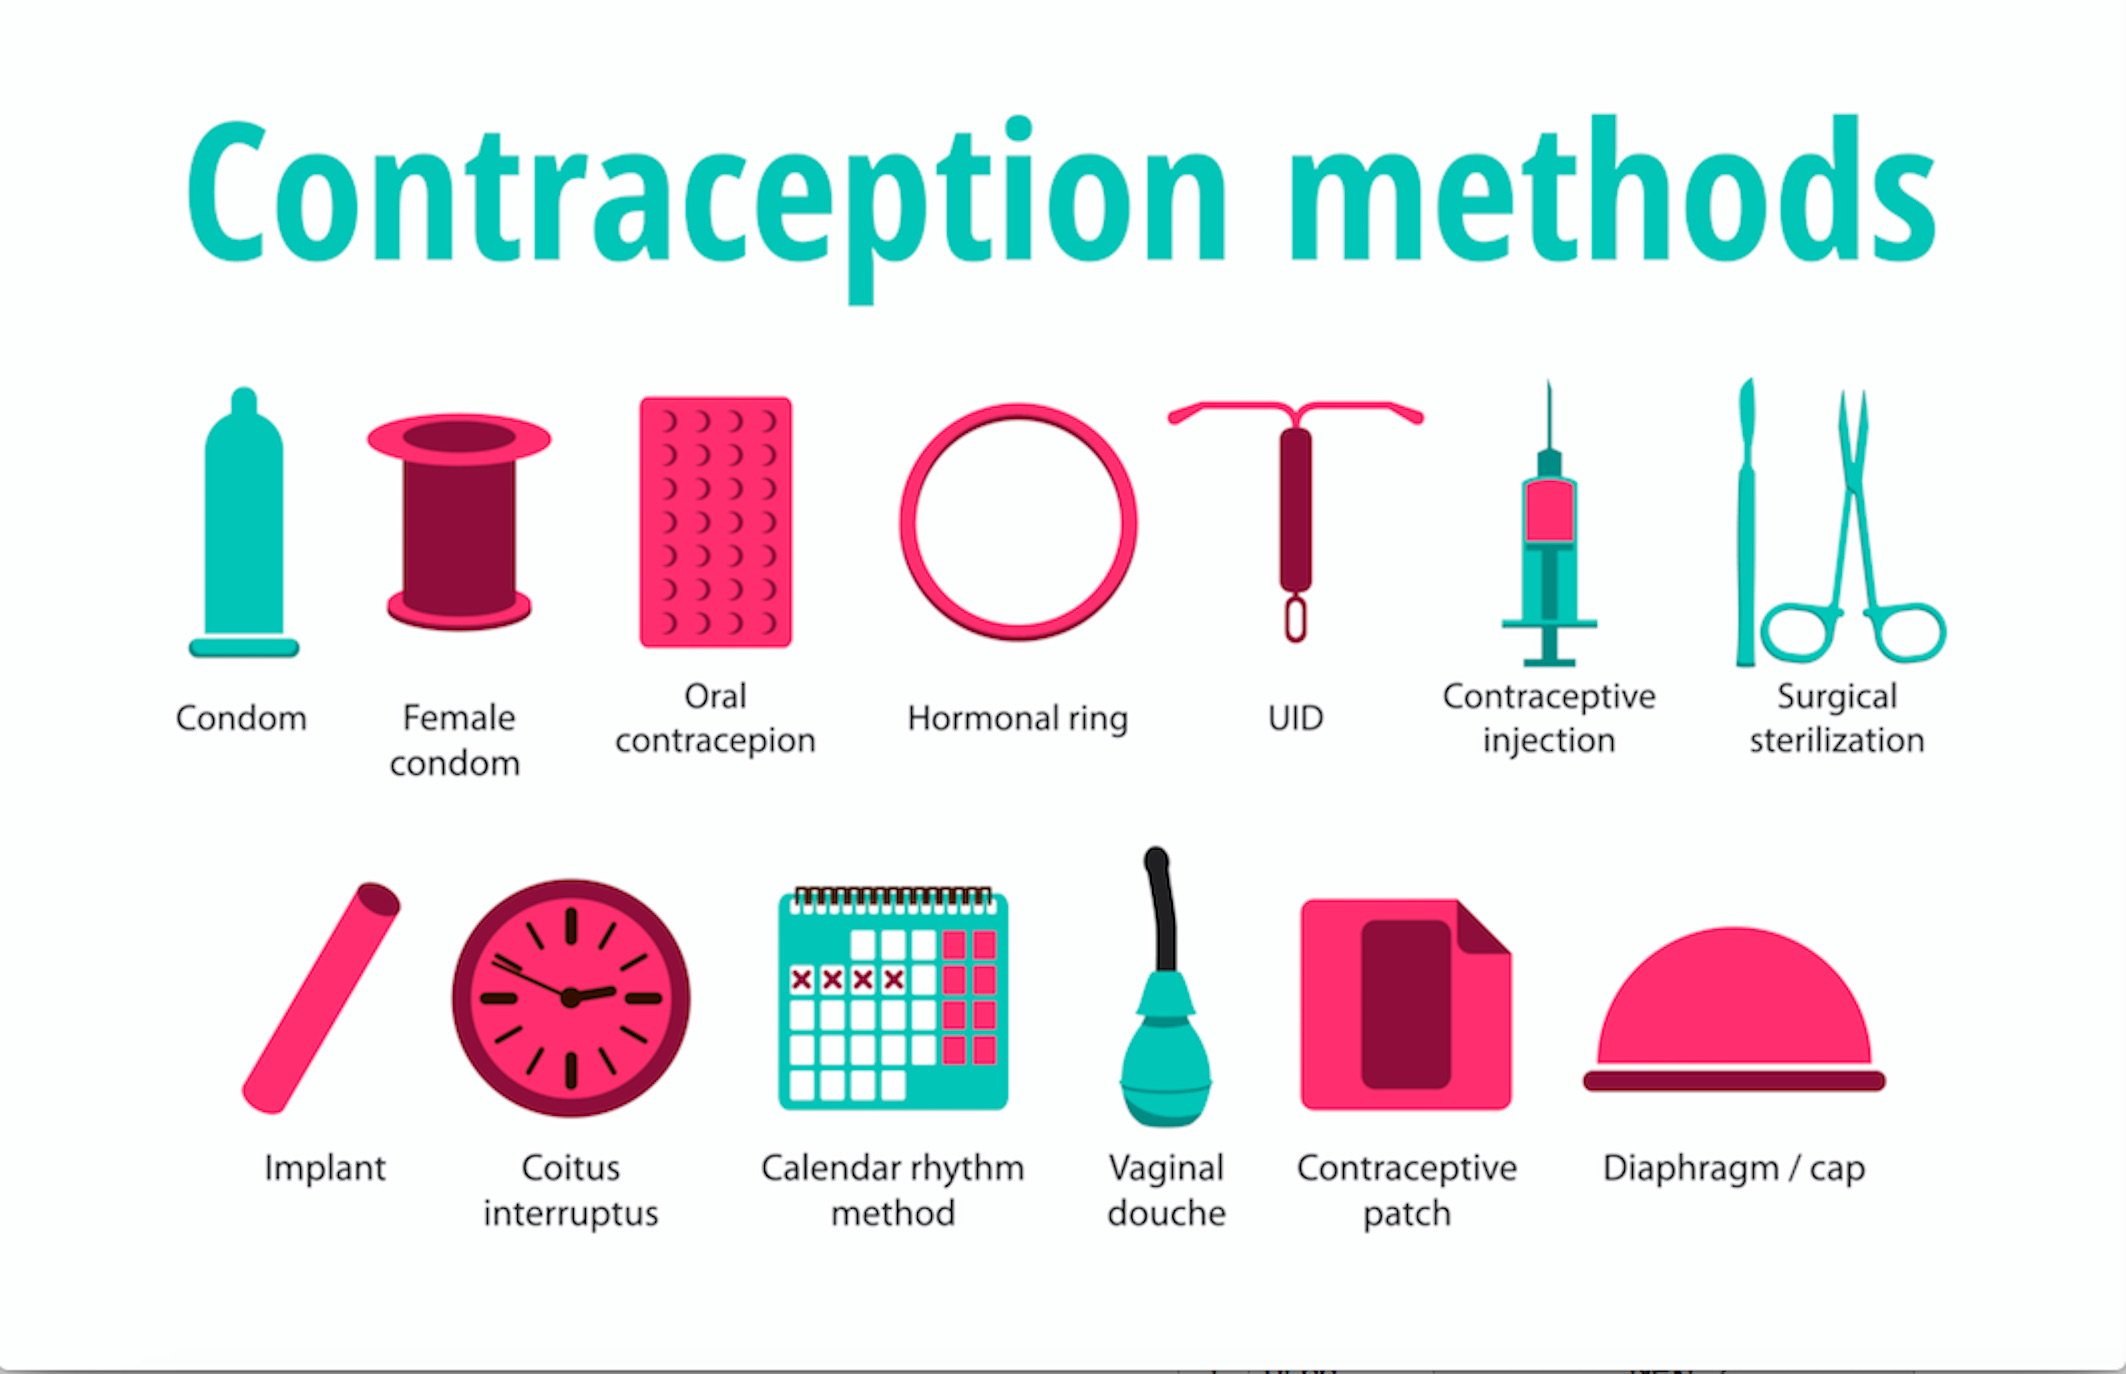 Contraceptive Reference Chart 2018